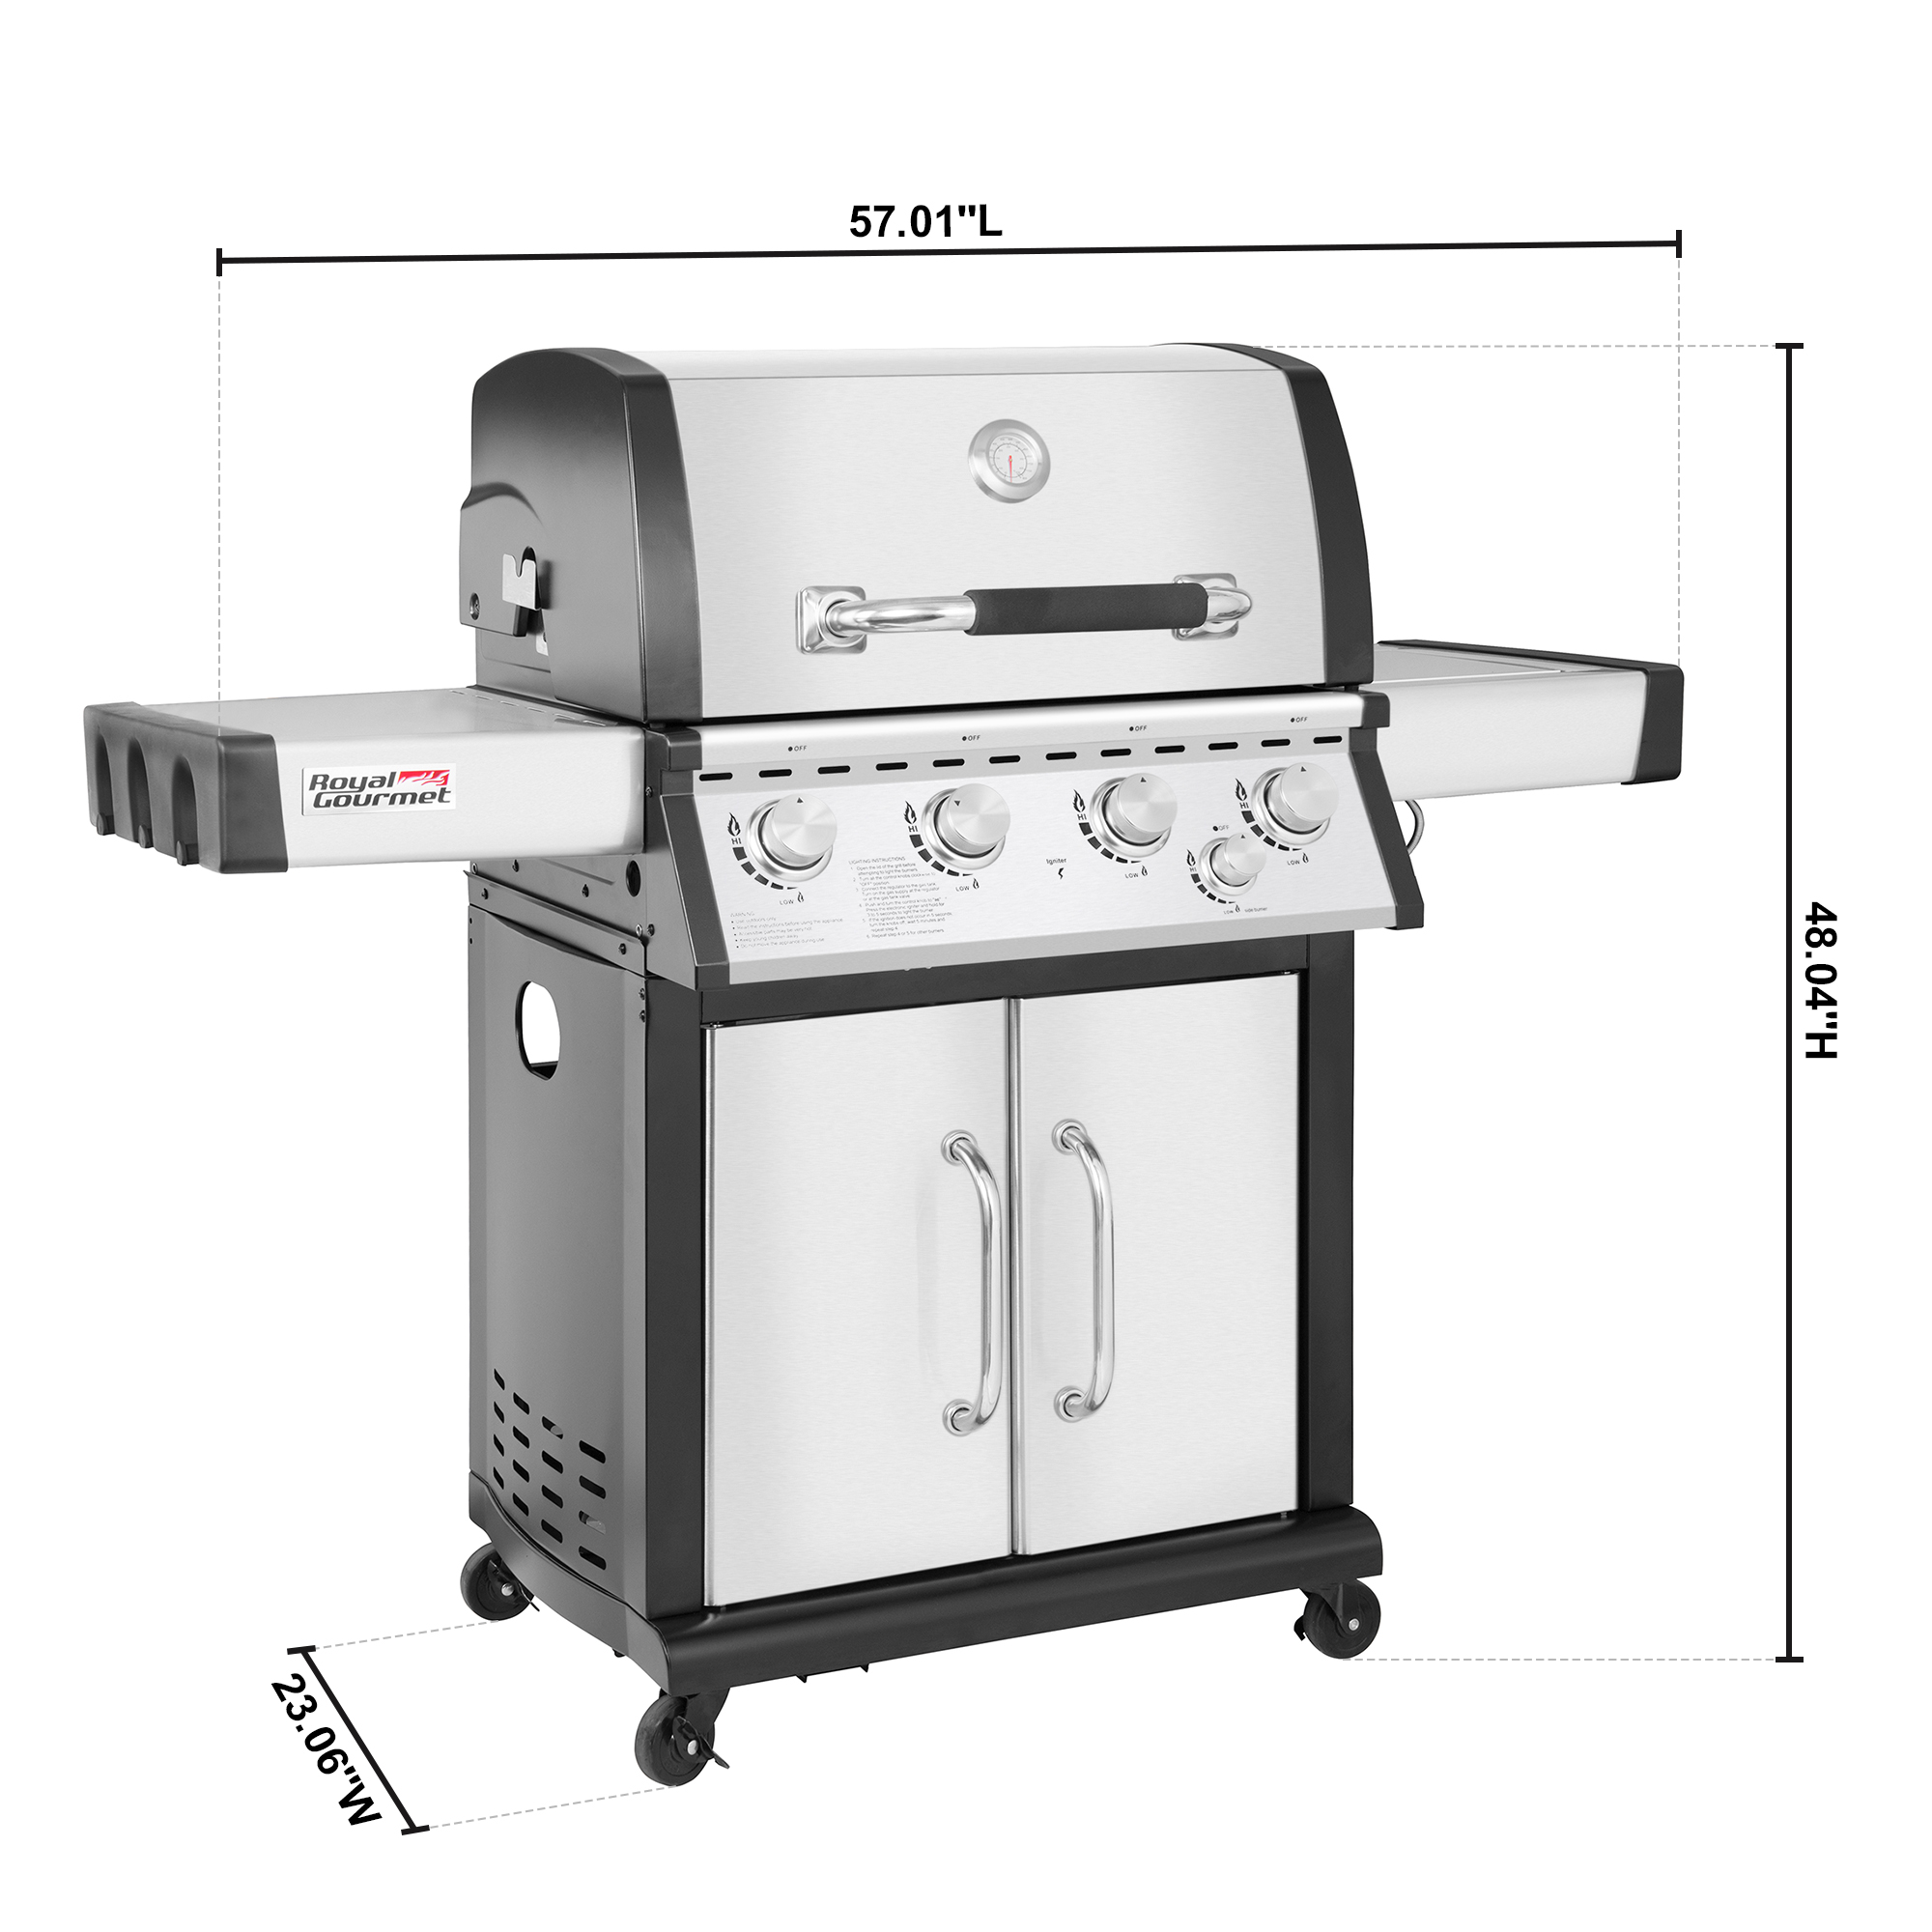 Royal Gourmet MG4001 4-Burner Propane Gas Grill with Side Burner, Stainless Steel, 60000 BTU - image 3 of 7